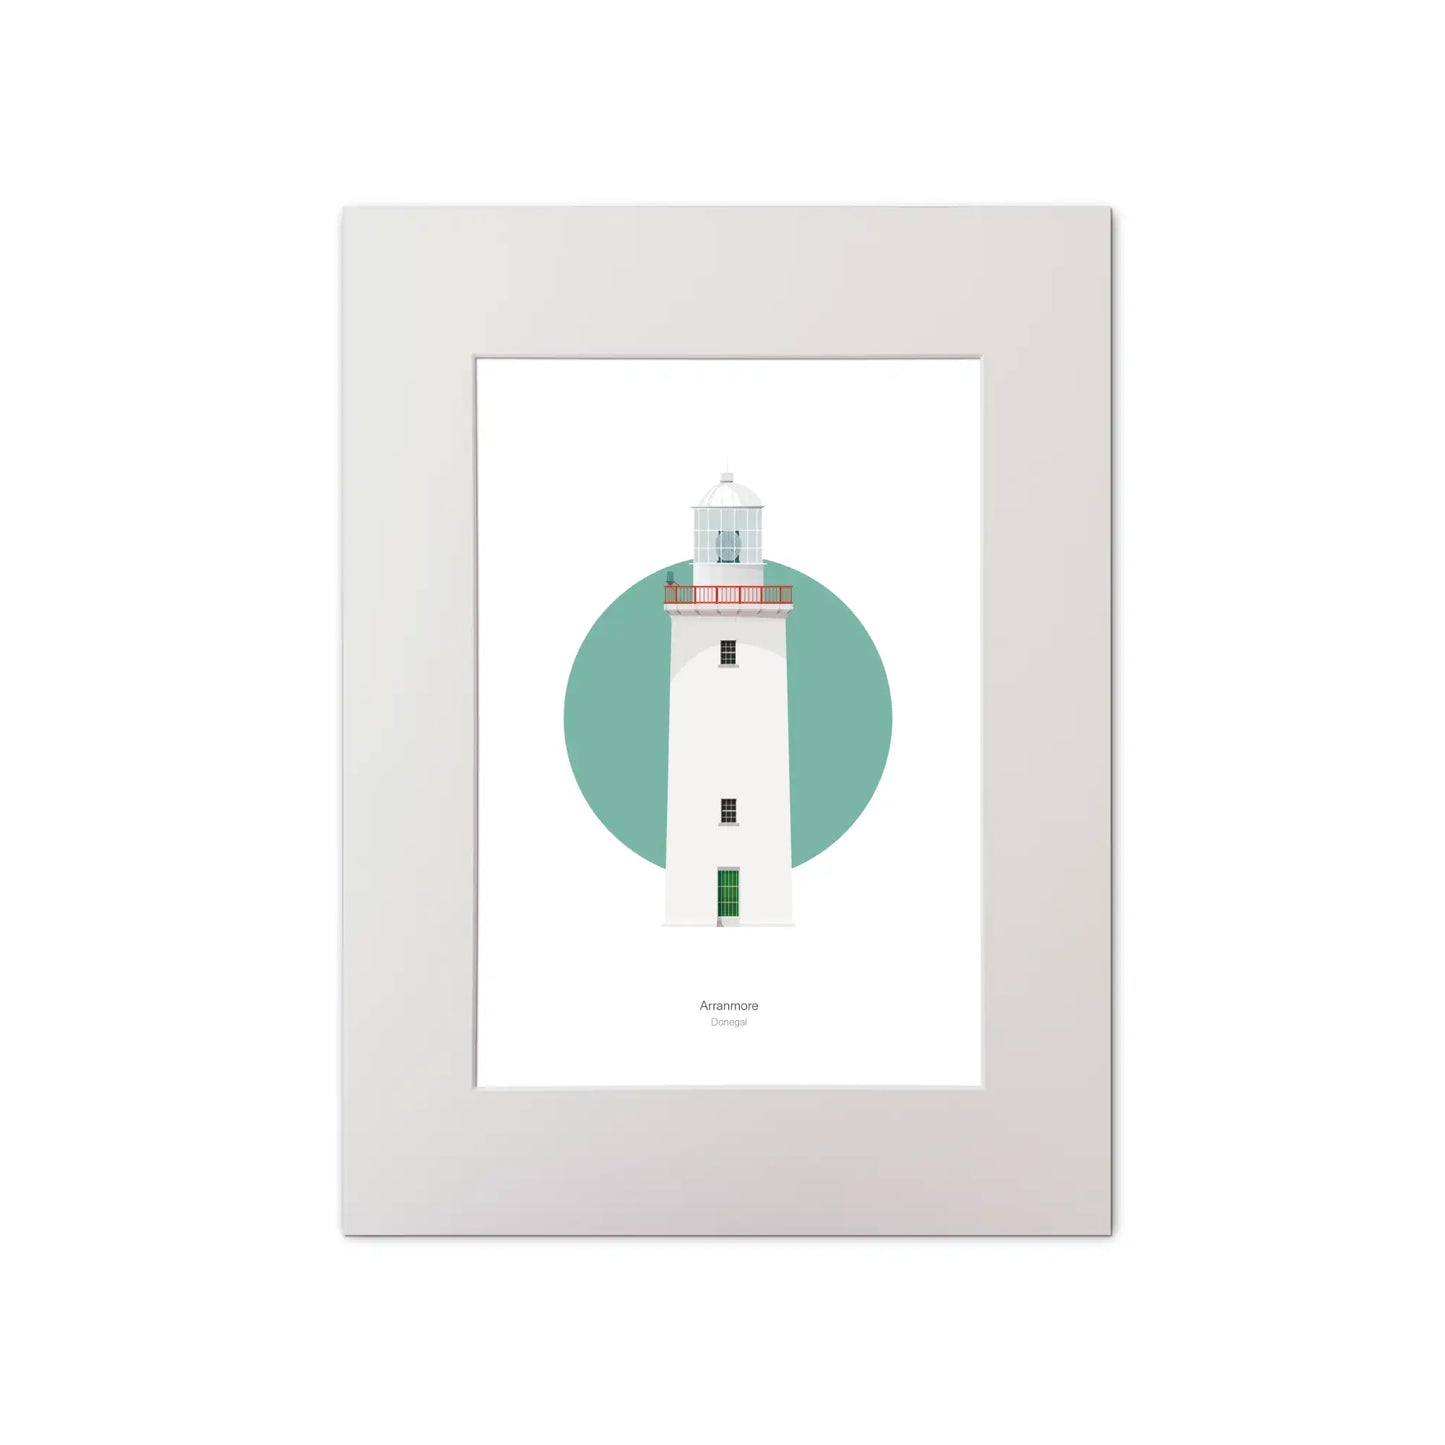 Illustration of Arranmore lighthouse on a white background inside light blue square, mounted and measuring 30x40cm.